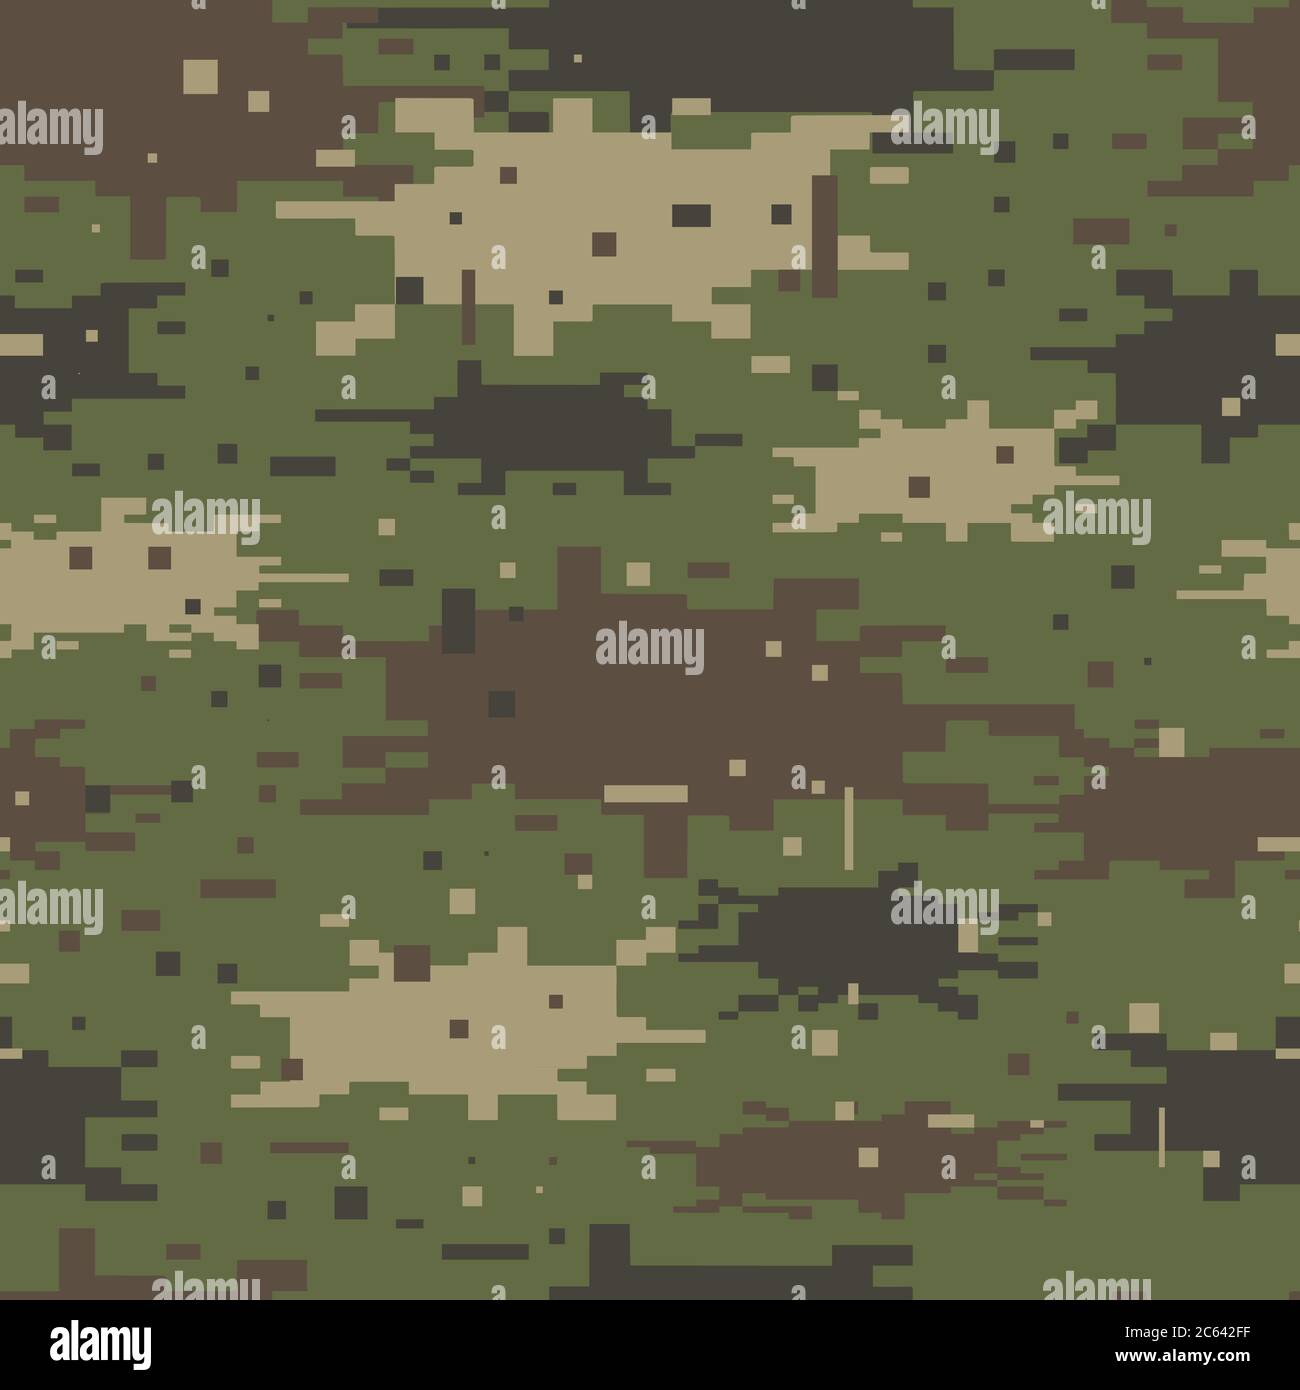 Digital camouflage pattern. Design element for poster, clothes ...